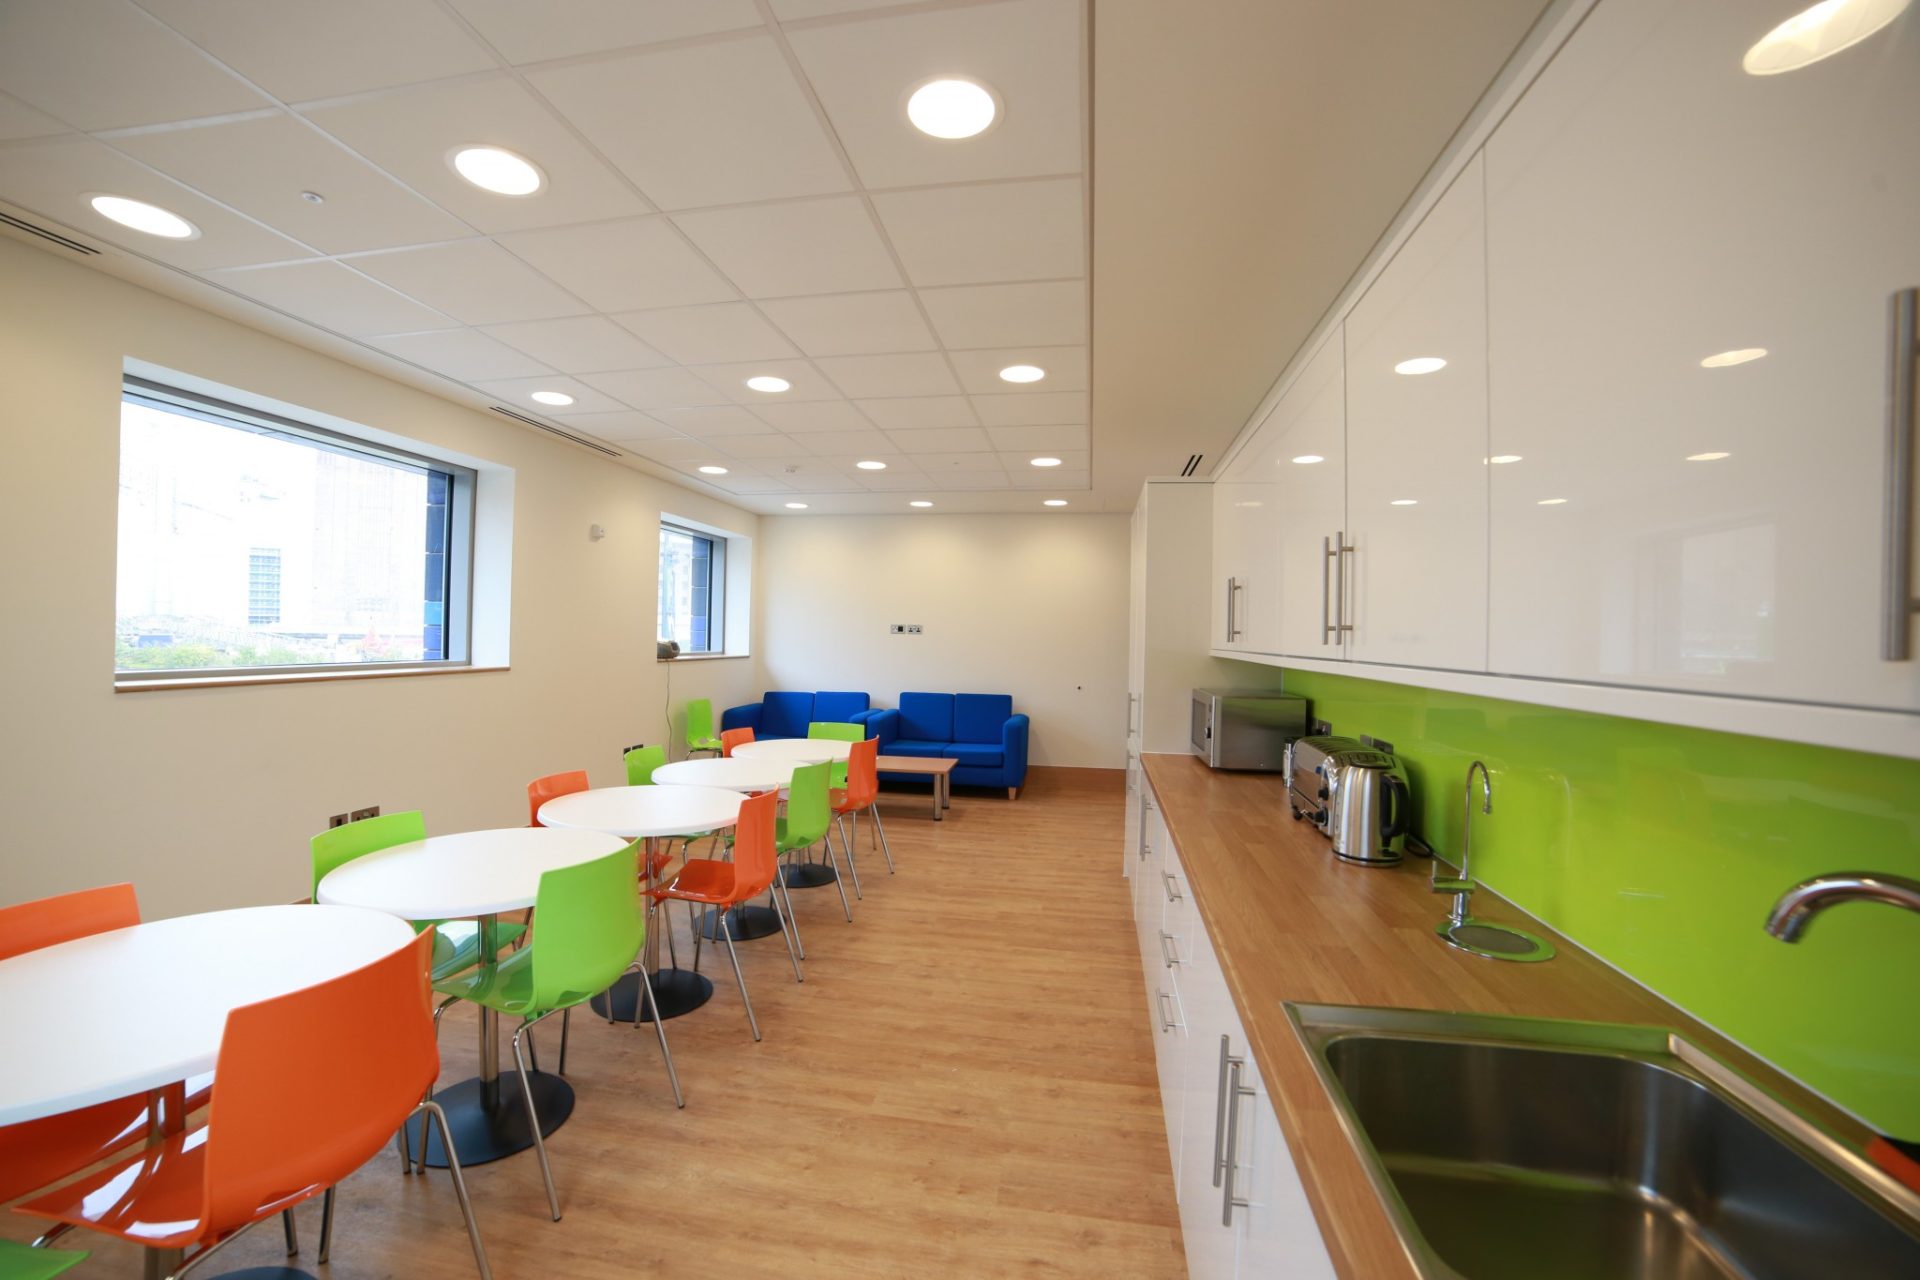 Stortford completes interior fit-out for Battersea Dogs & Cats Home